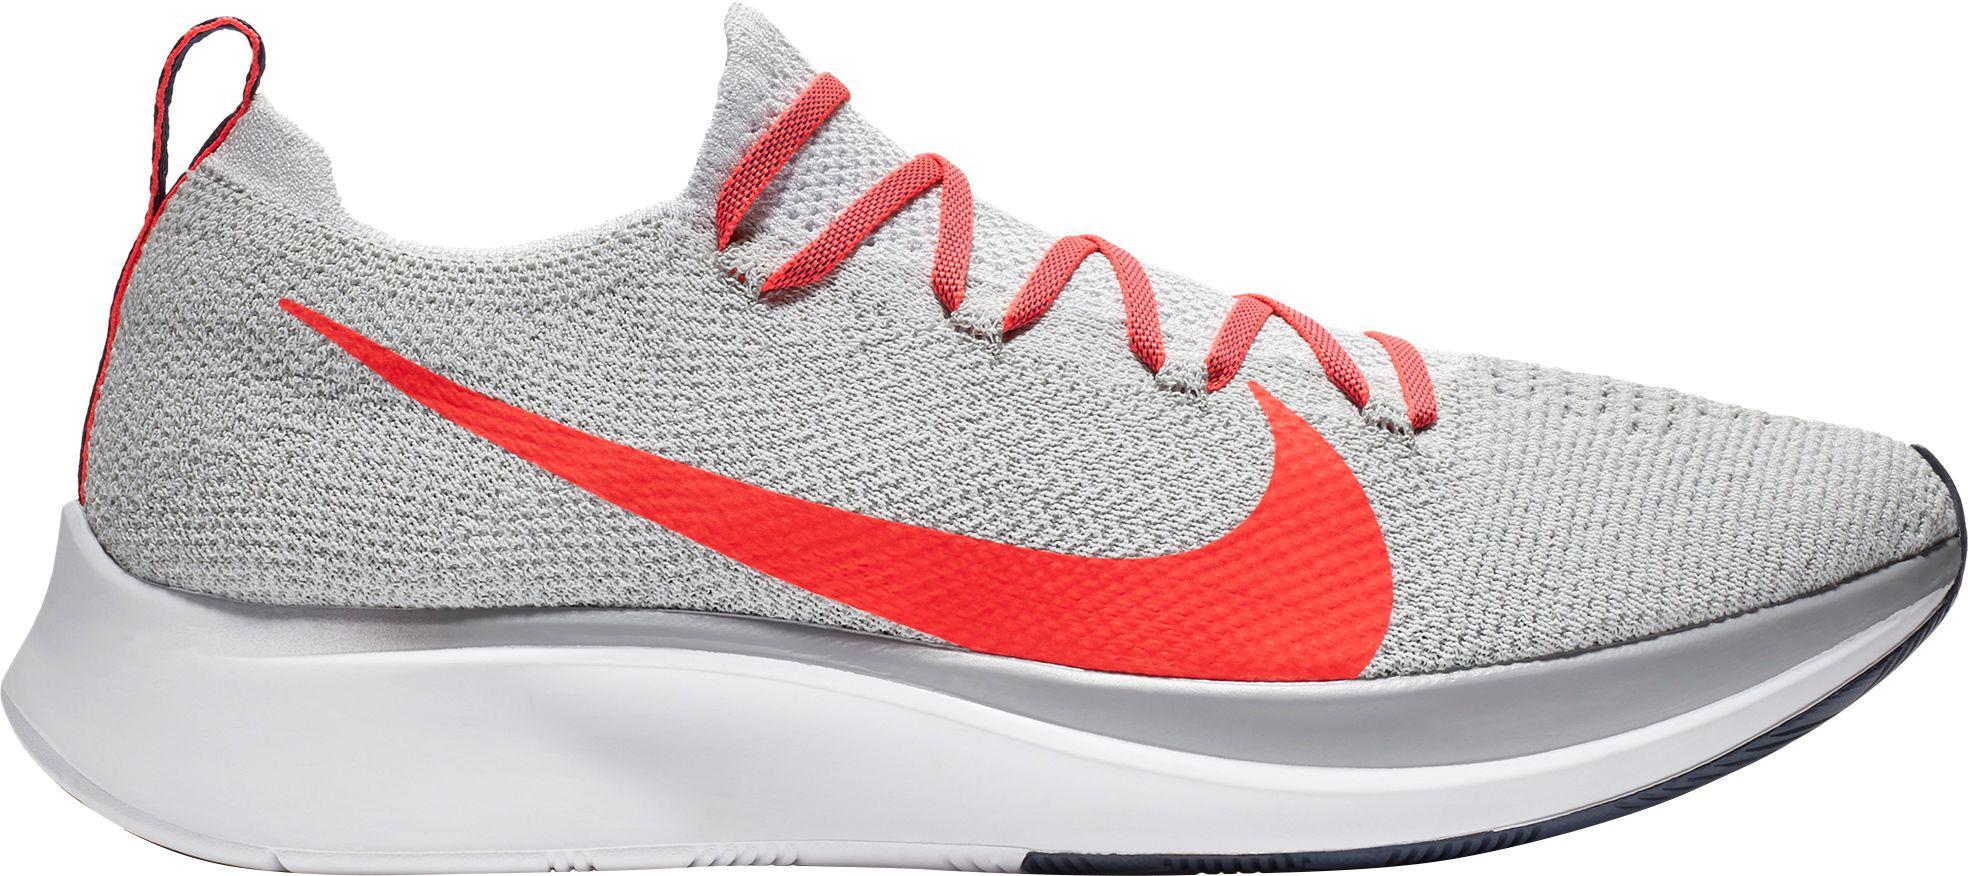 Nike Synthetic Zoom Fly Flyknit Running Shoes in Grey/Red (Gray) for Men -  Lyst